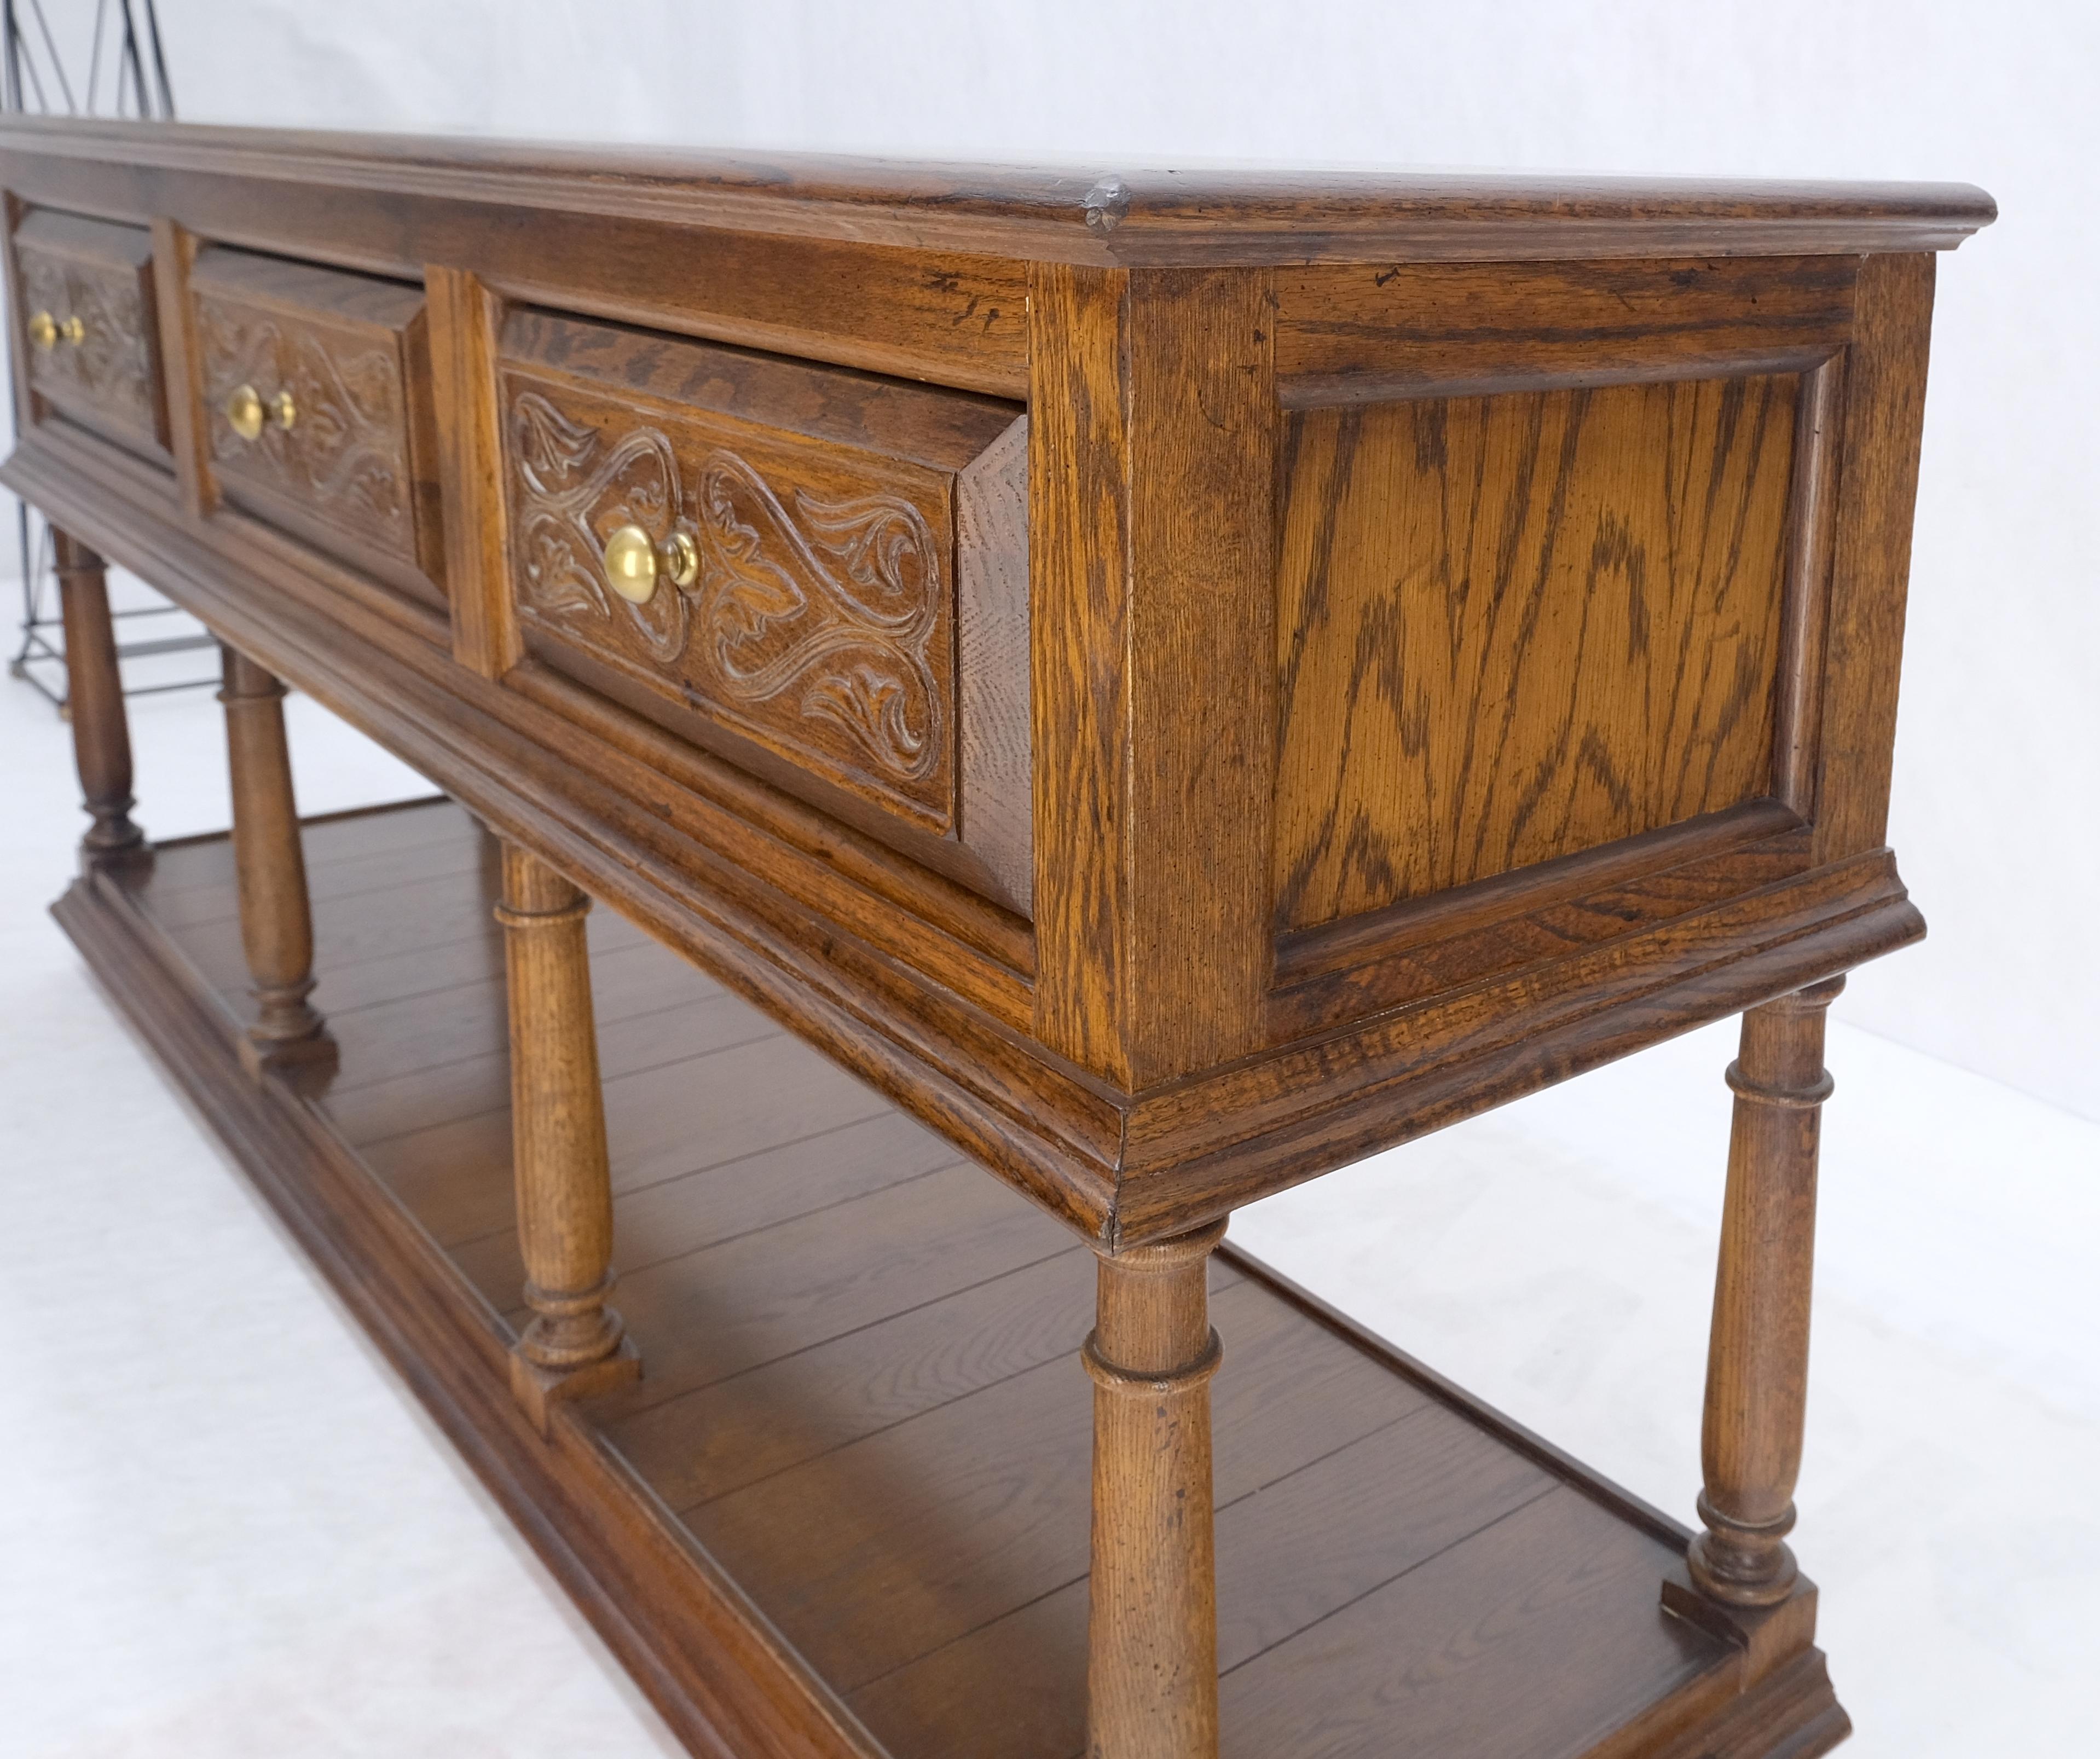 Spanish Colonial Carved Oak 3 Deep Drawer Sideboard Credenza Buffet Console MINT In Good Condition For Sale In Rockaway, NJ